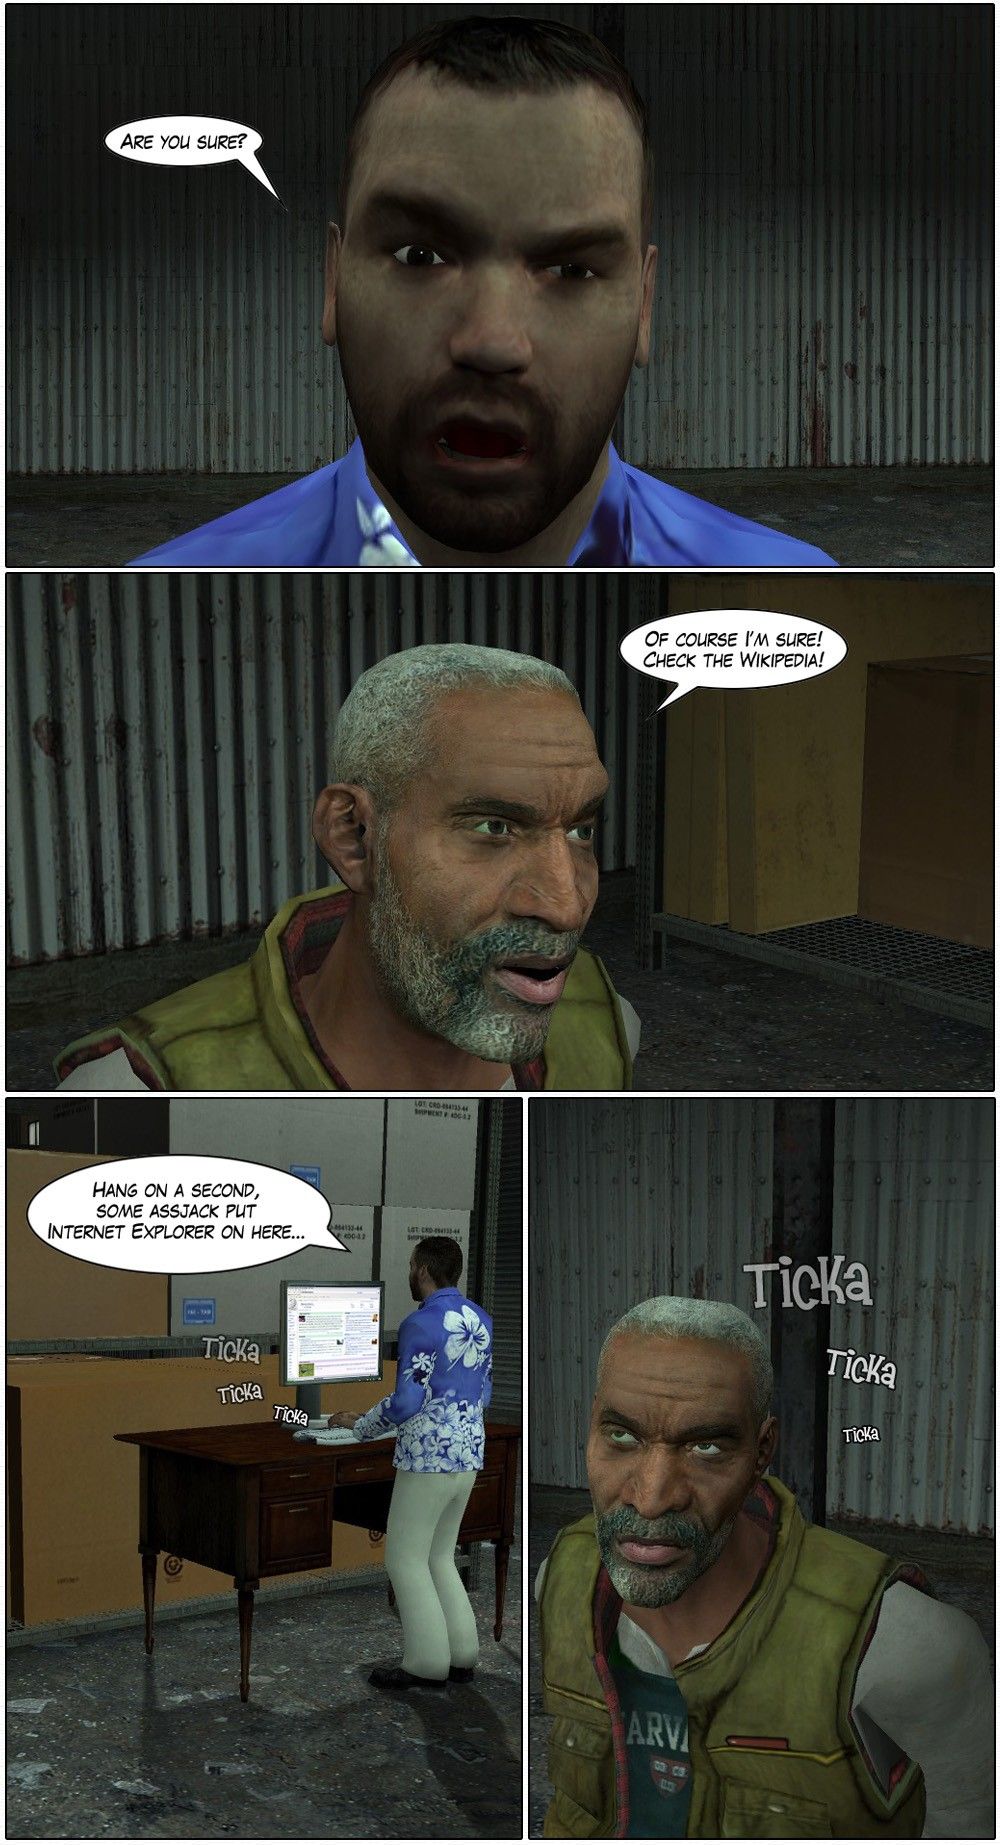 FZE asks his hostage if he's sure. The man says of course he's sure and tells FZE to check the Wikipedia. FZE goes to a computer and starts typing, saying to hang on a second as some assjack put Internet Explorer on there. The hostage rolls his eyes.